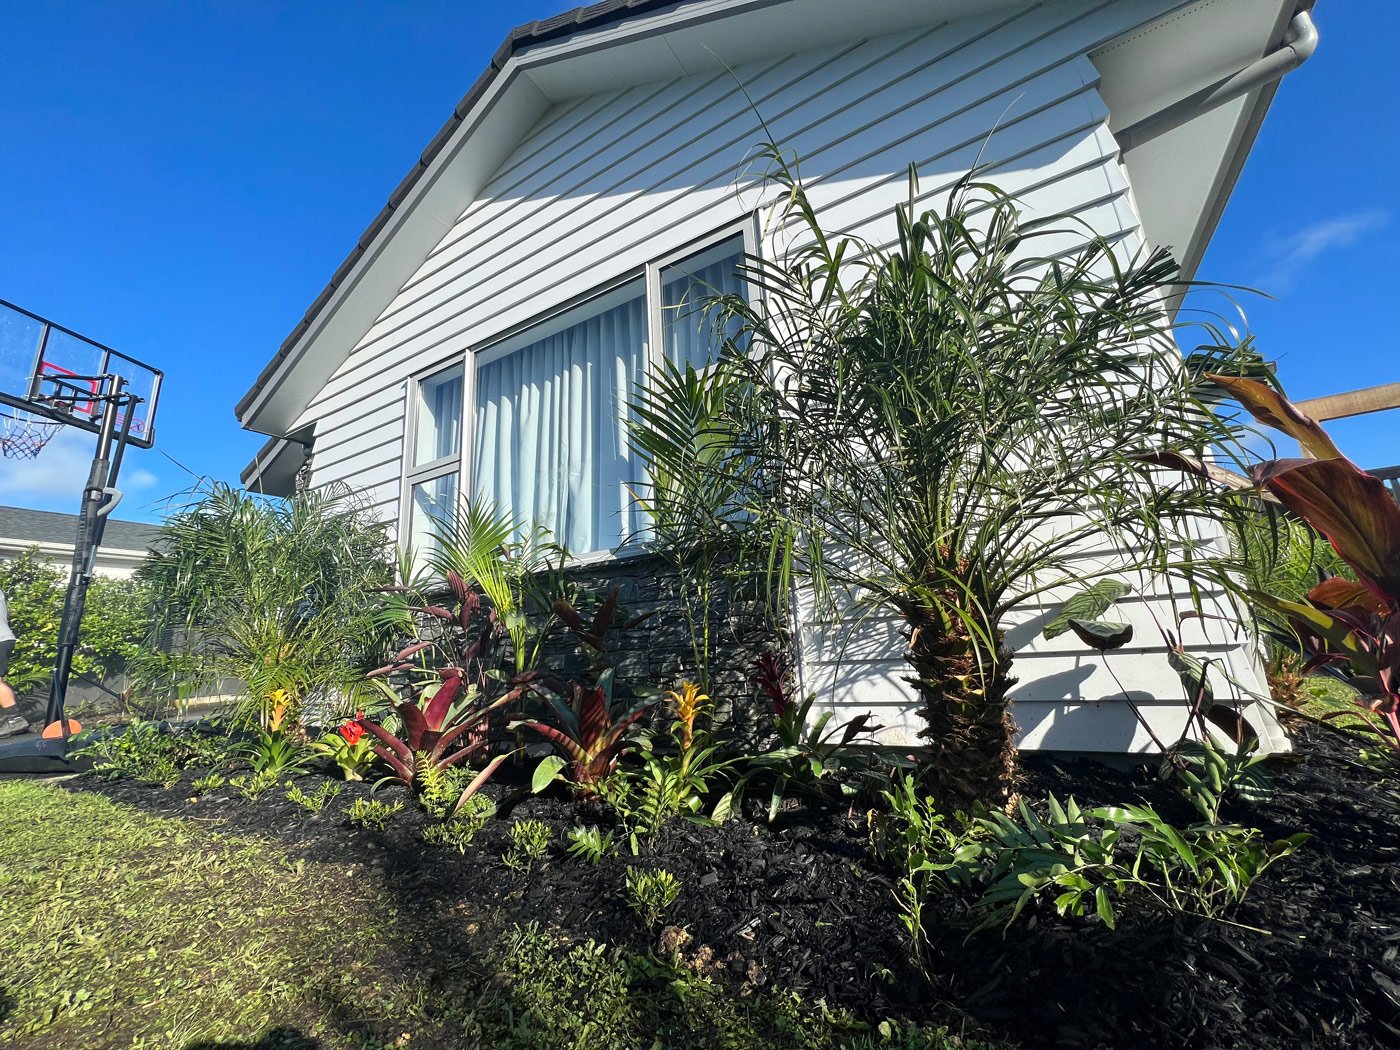 Mulch garden right up against a house front with heaps of small and freshly planted bush saplings